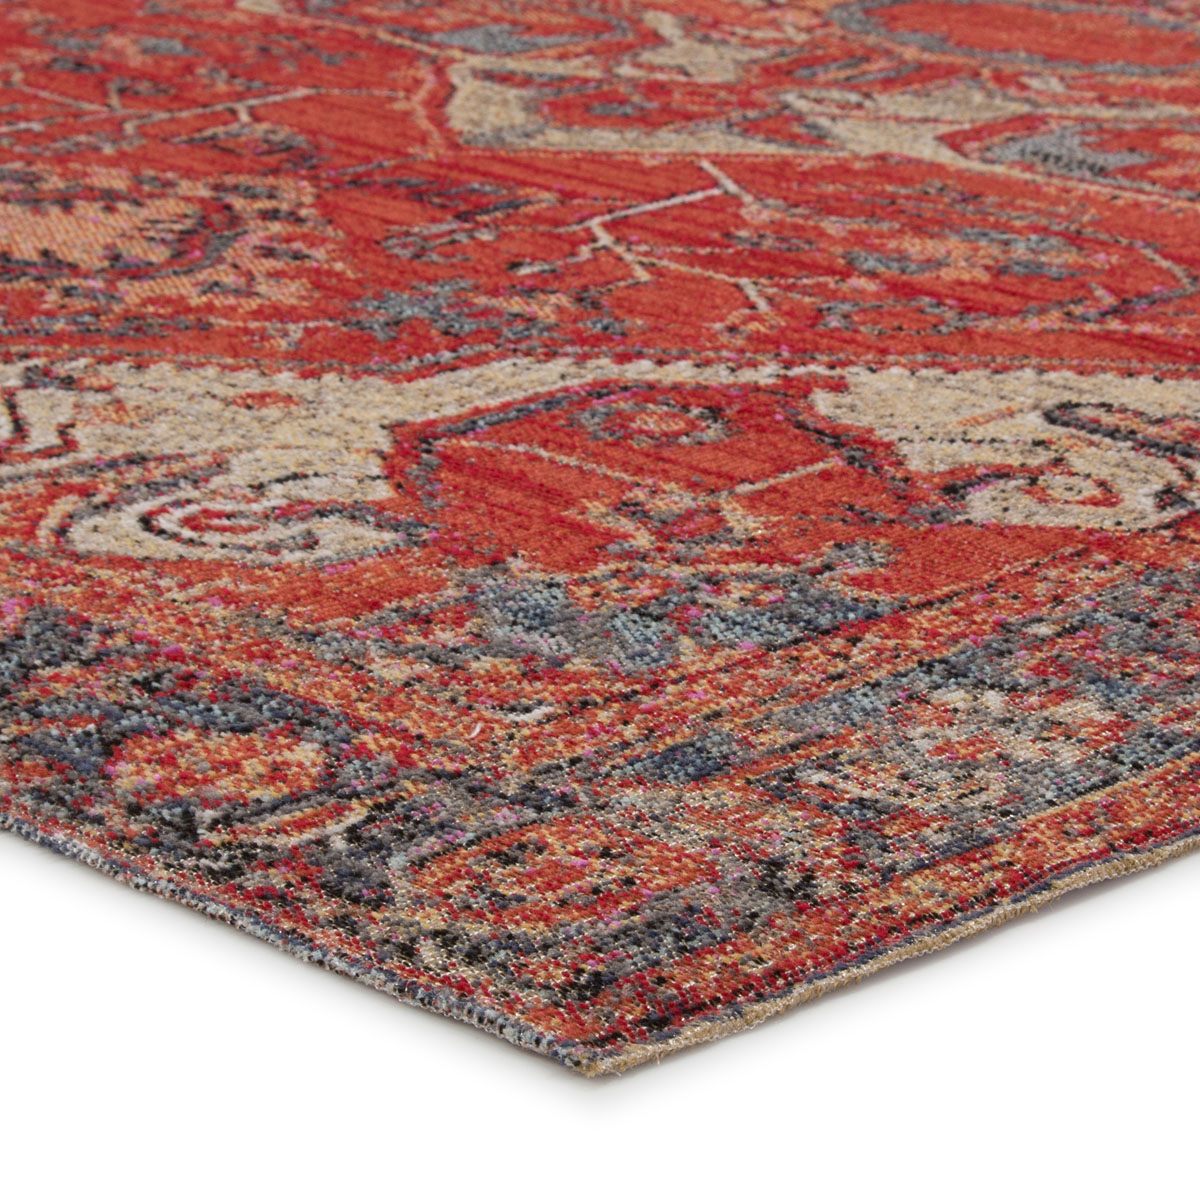 Mikras VII Area Rug - 5' X 7'6" - Red/Blue